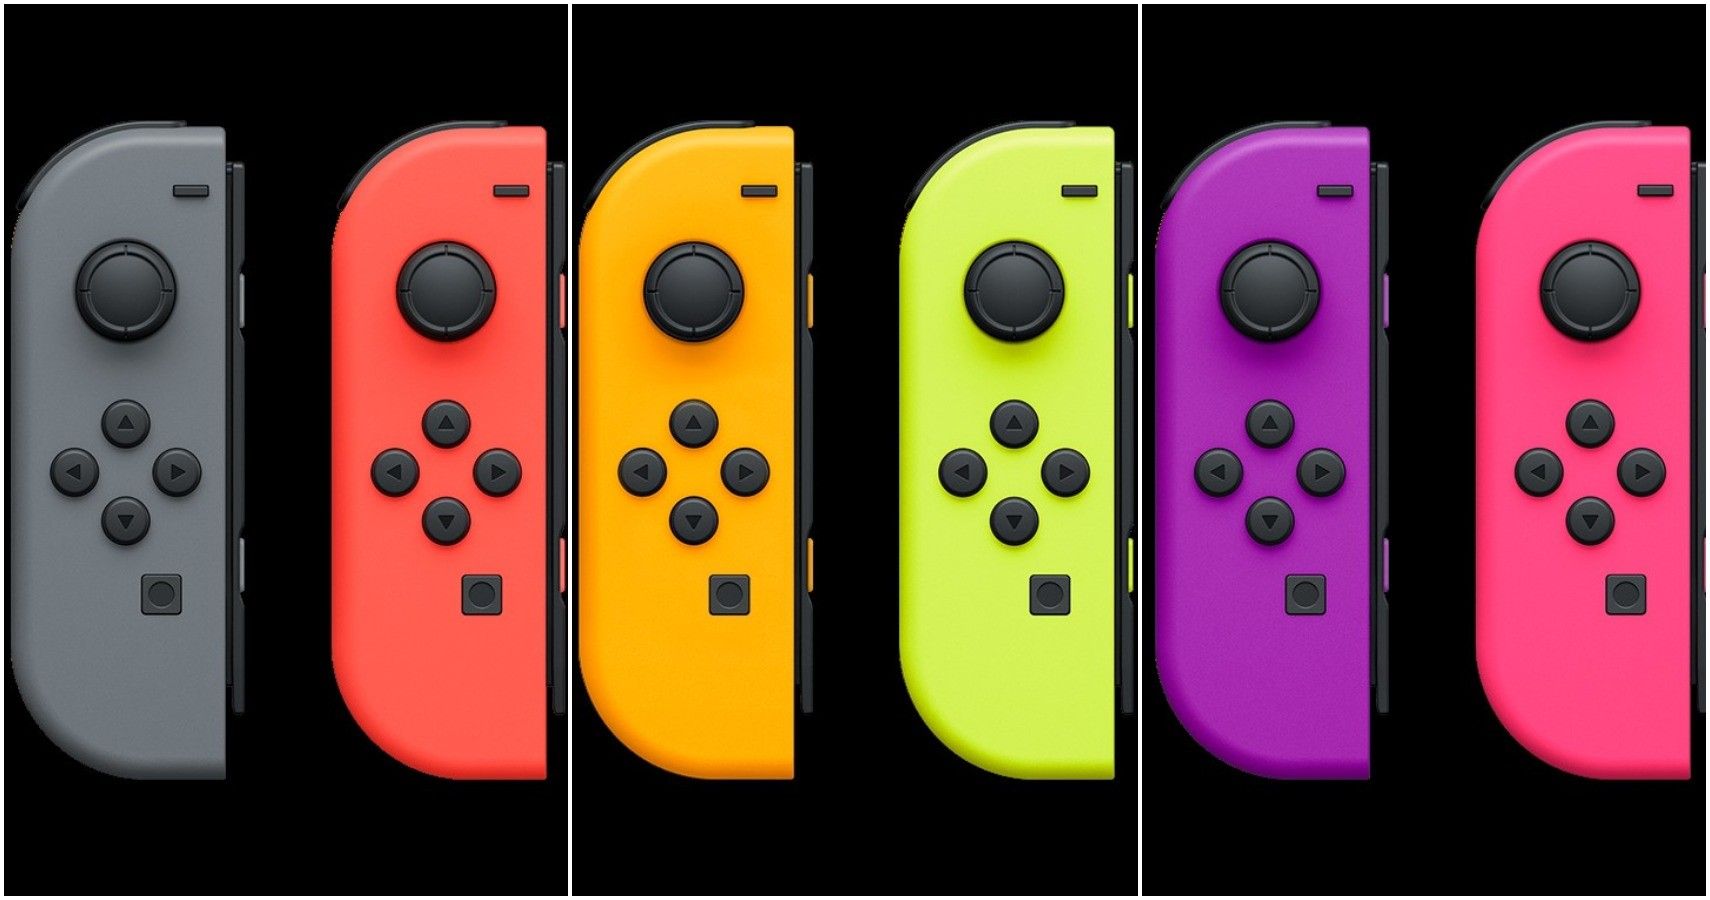 different color switch controllers